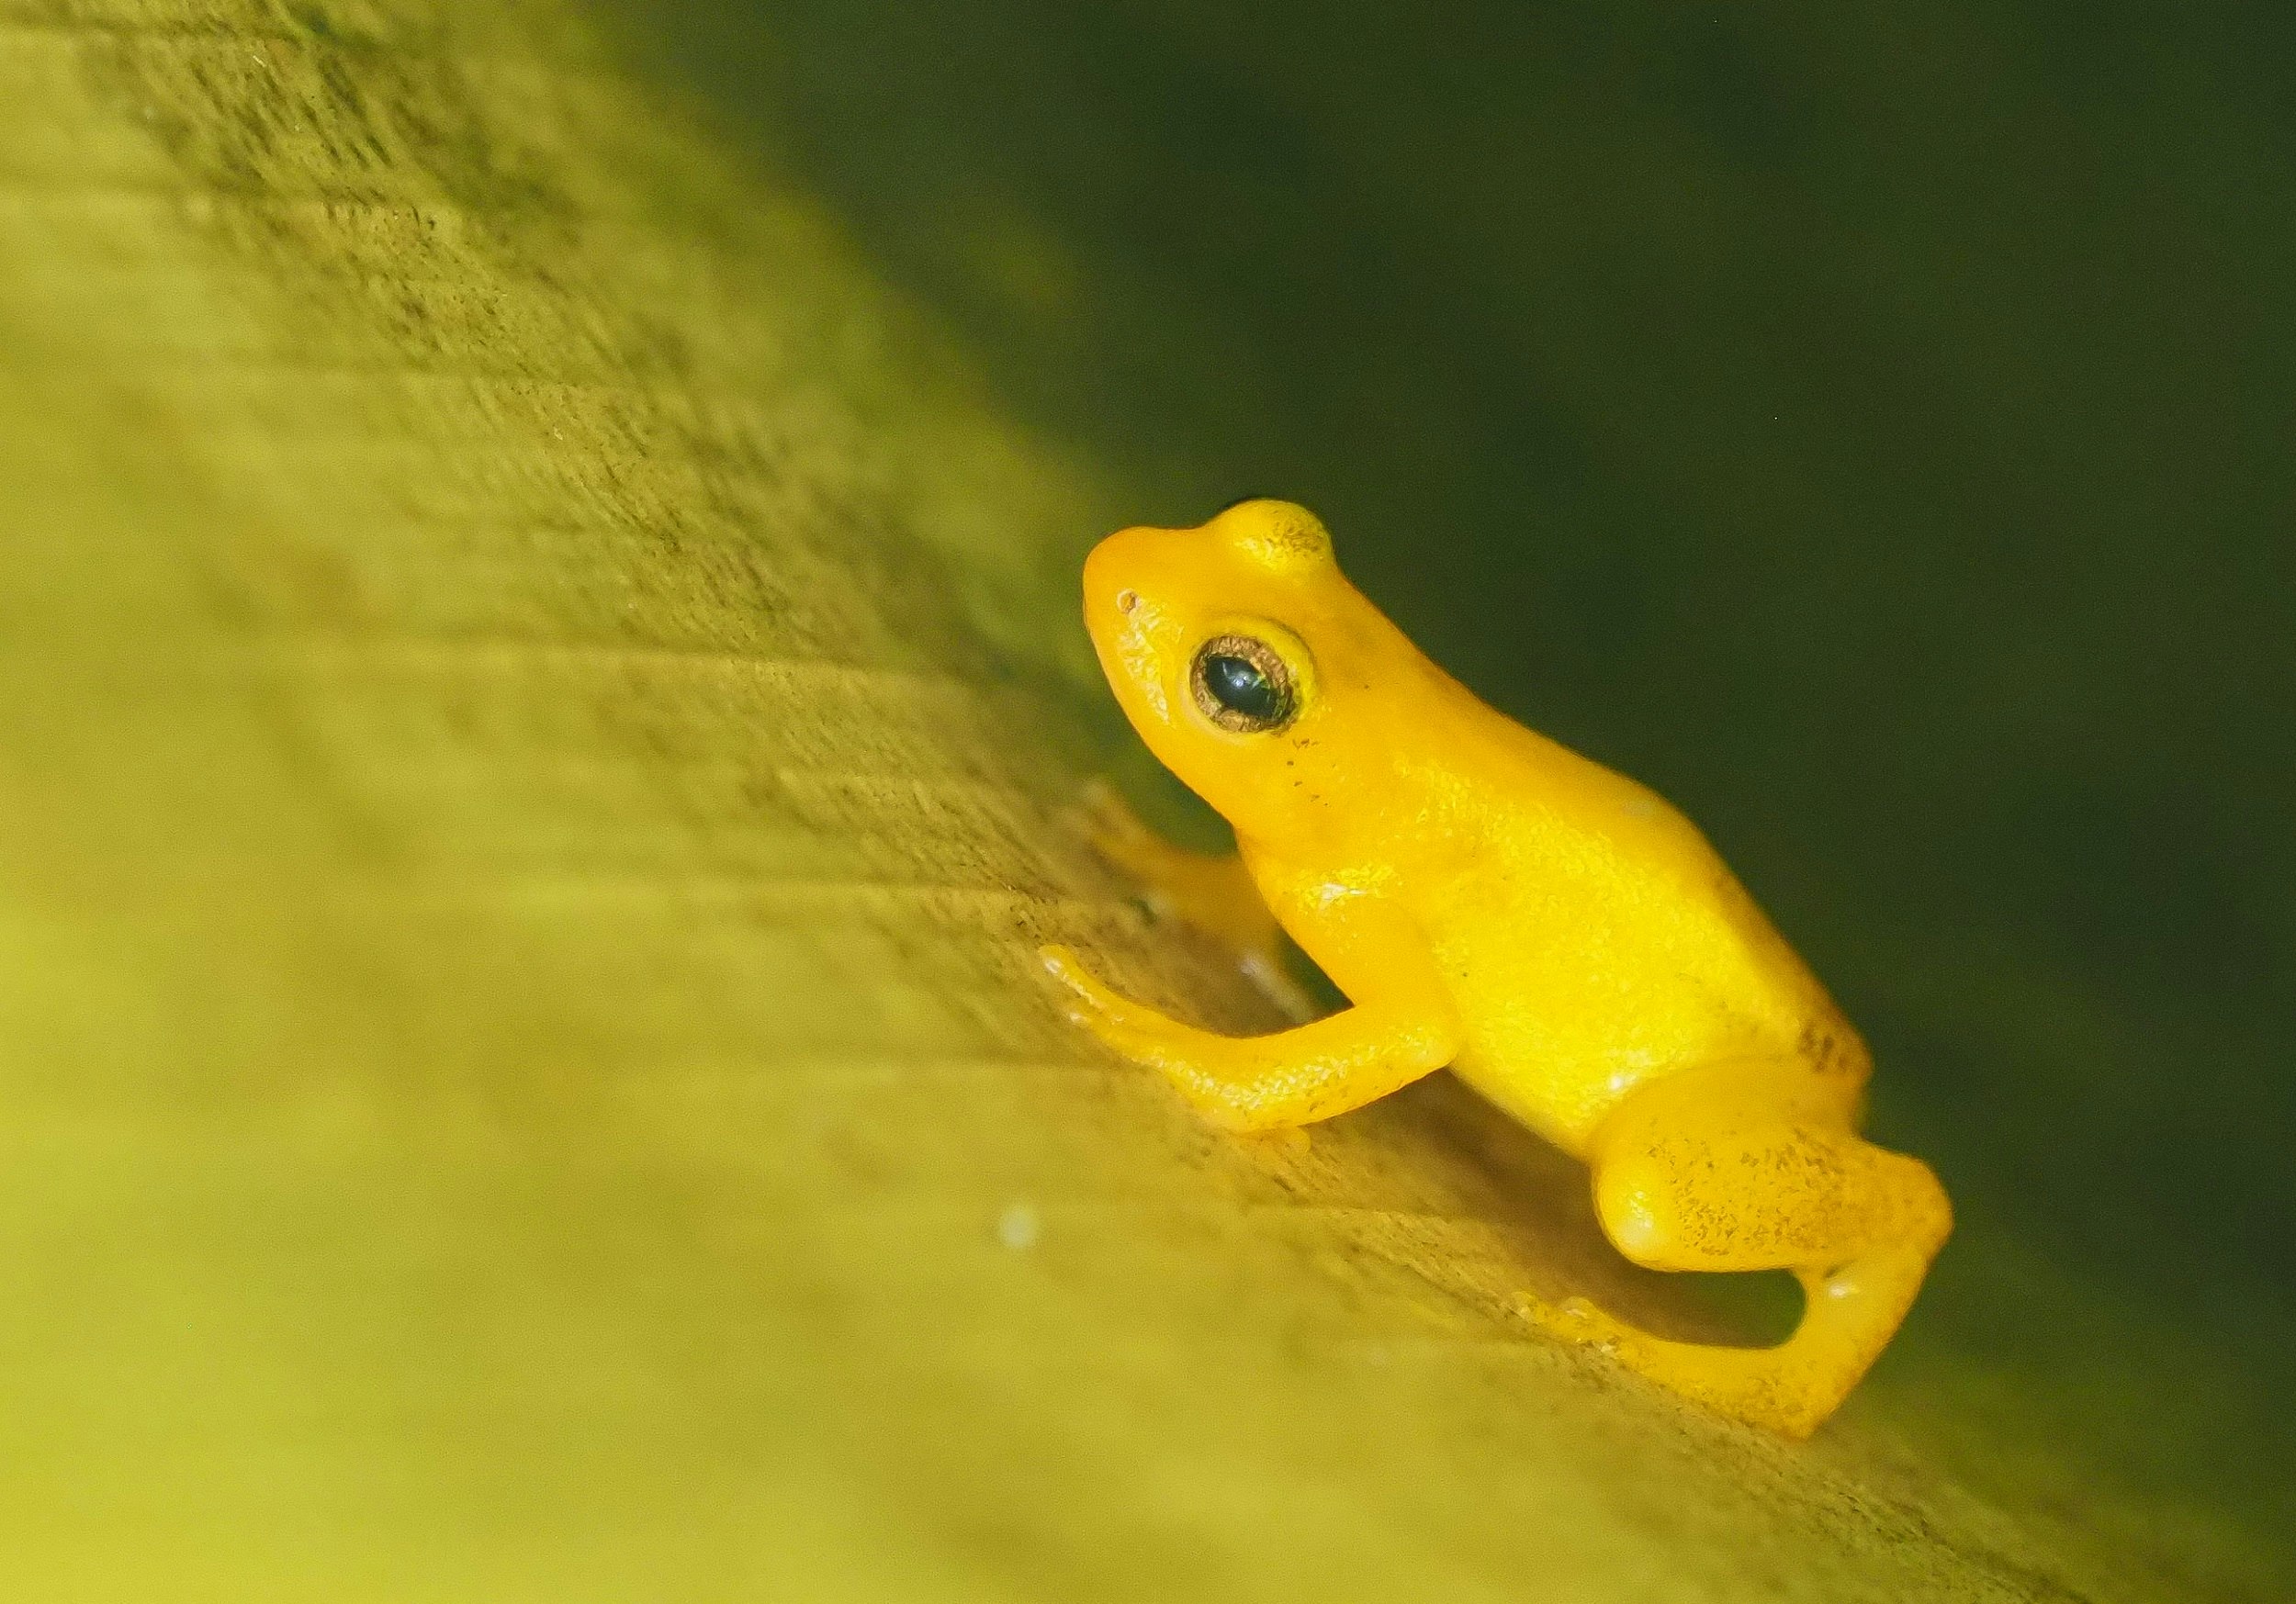 A tiny gold-colored frog (with black eyes) sits on a leaf.